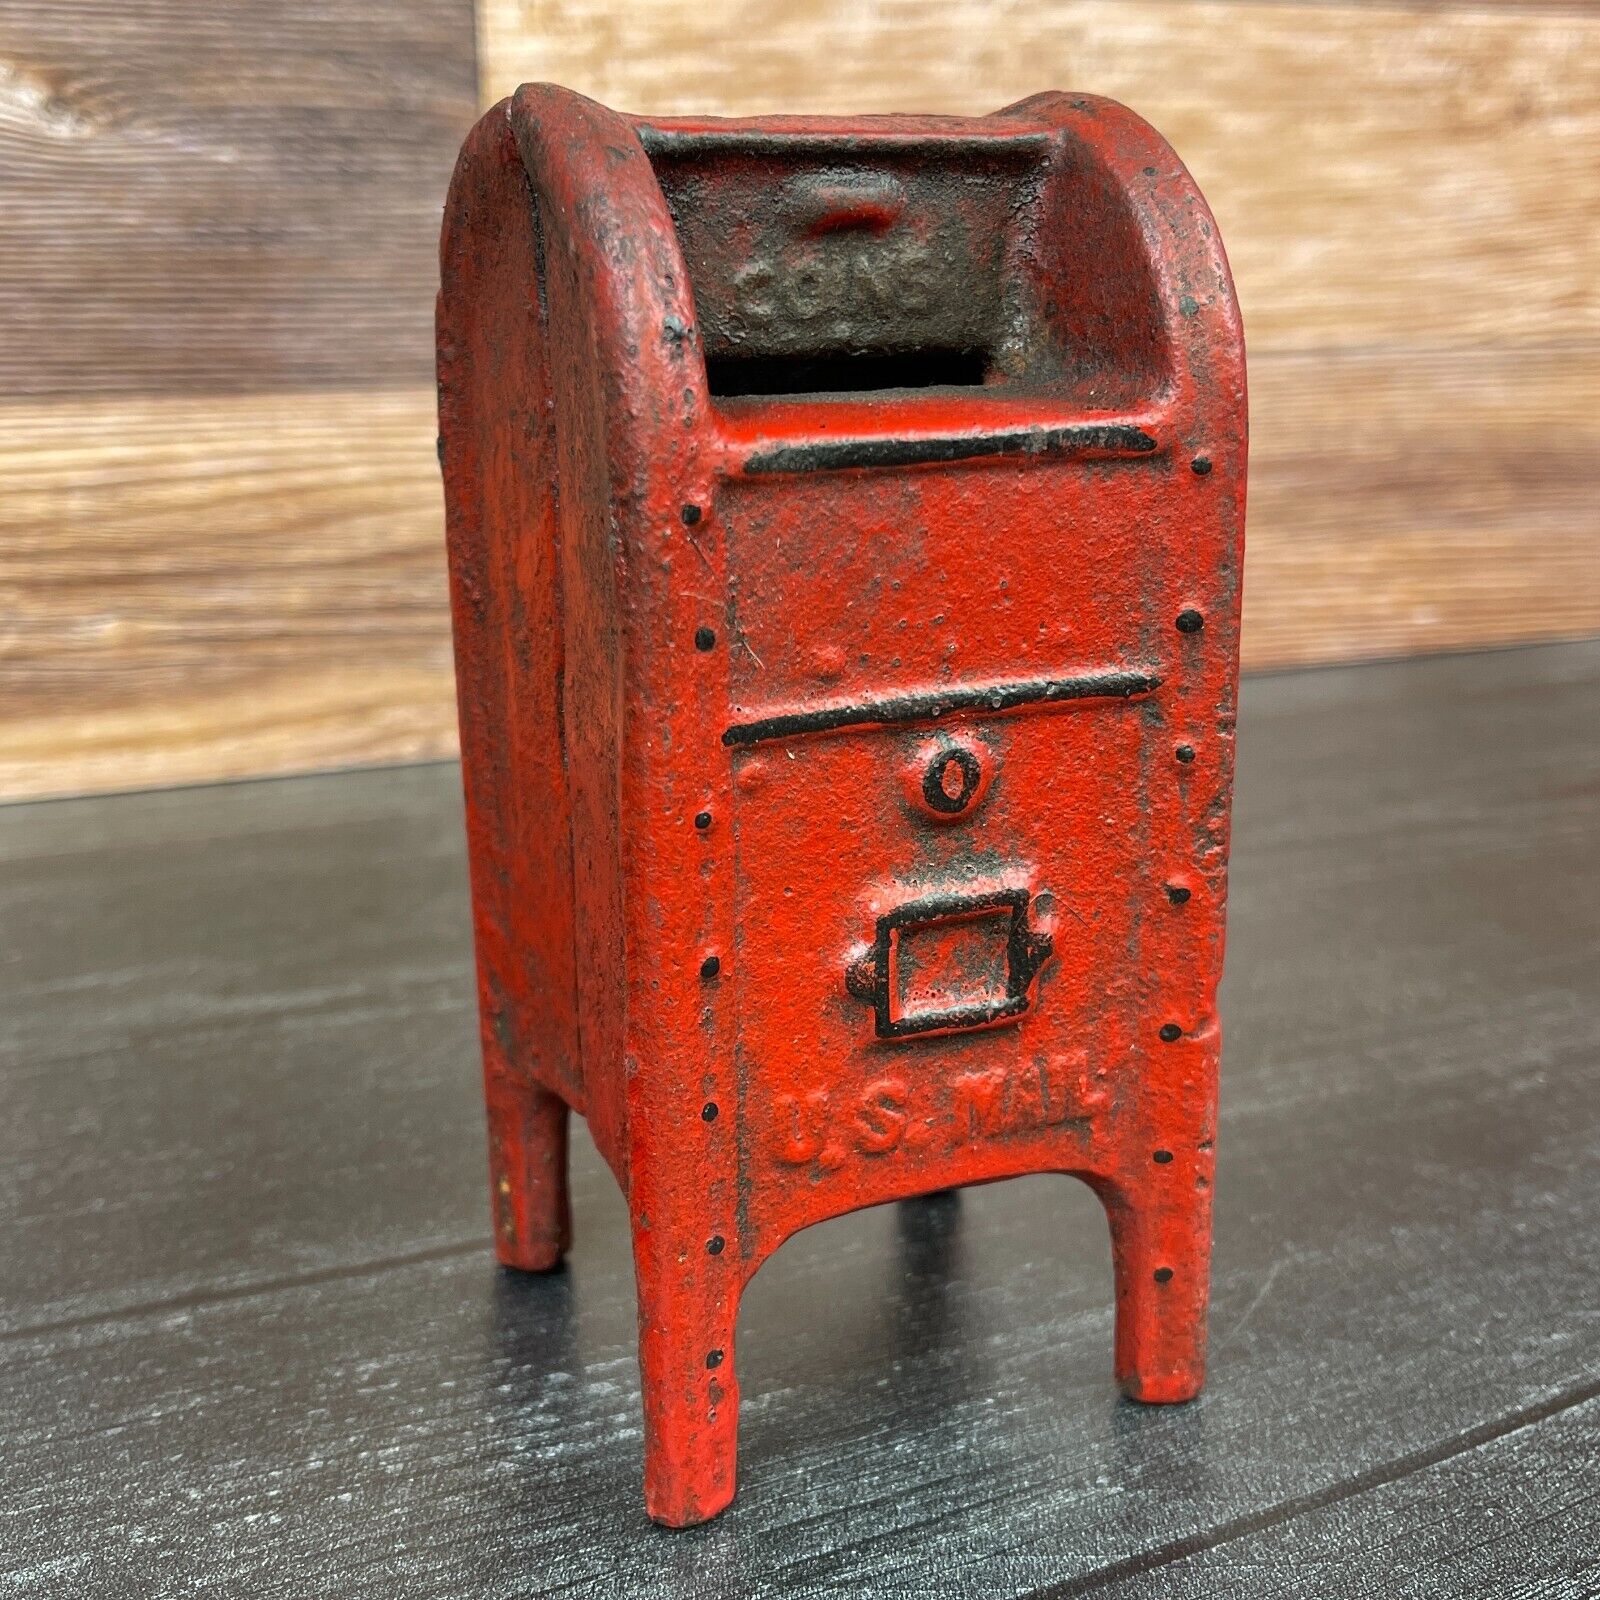 USPS Mailbox Bank, Red Cast Iron Piggy Bank With Antique Vintage Finish